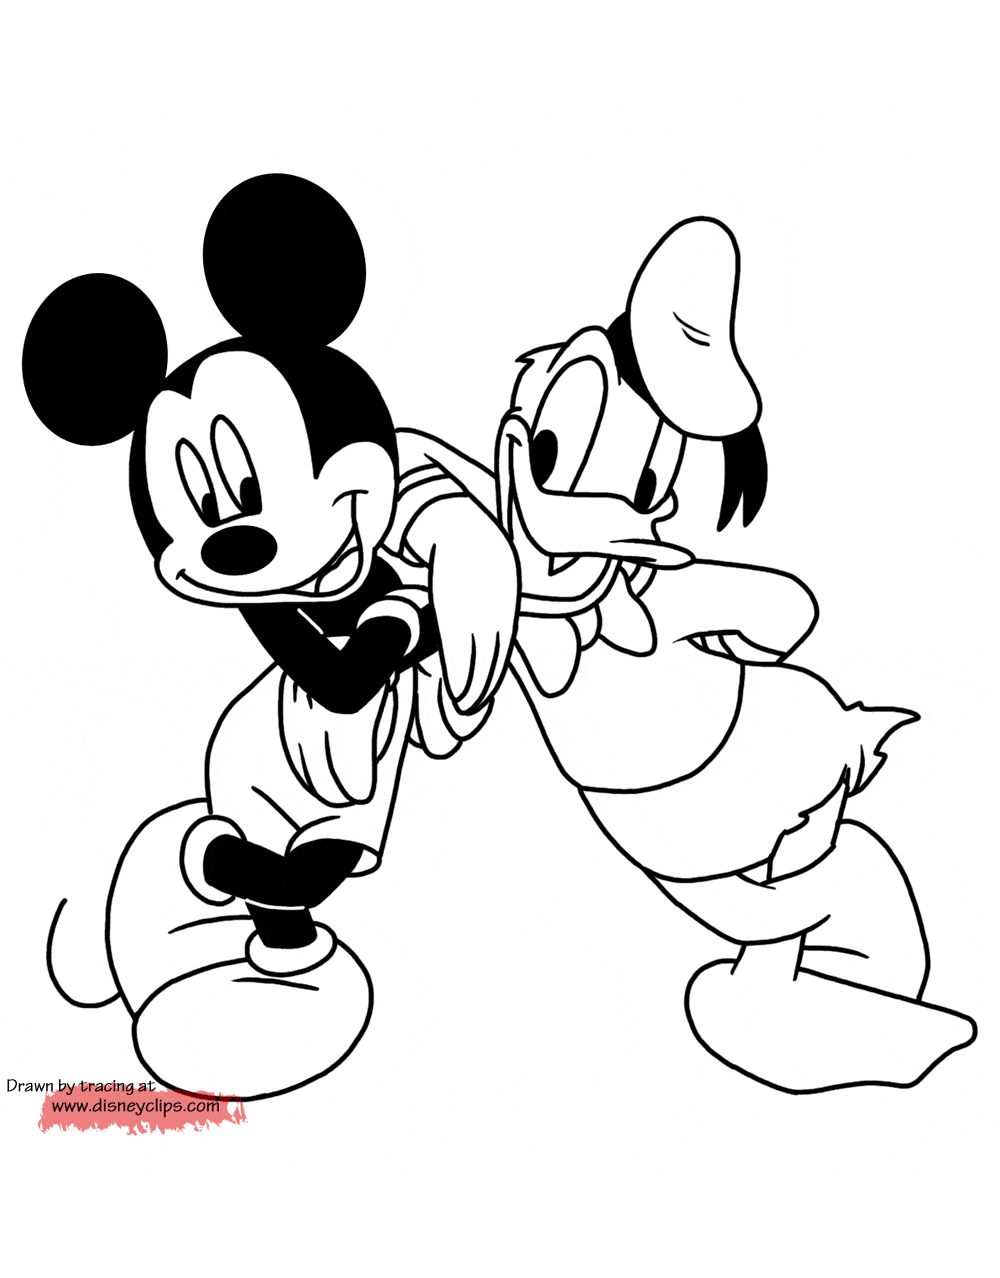 Download Mickey Mouse & Friends Coloring Pages (6) | Disneyclips.com